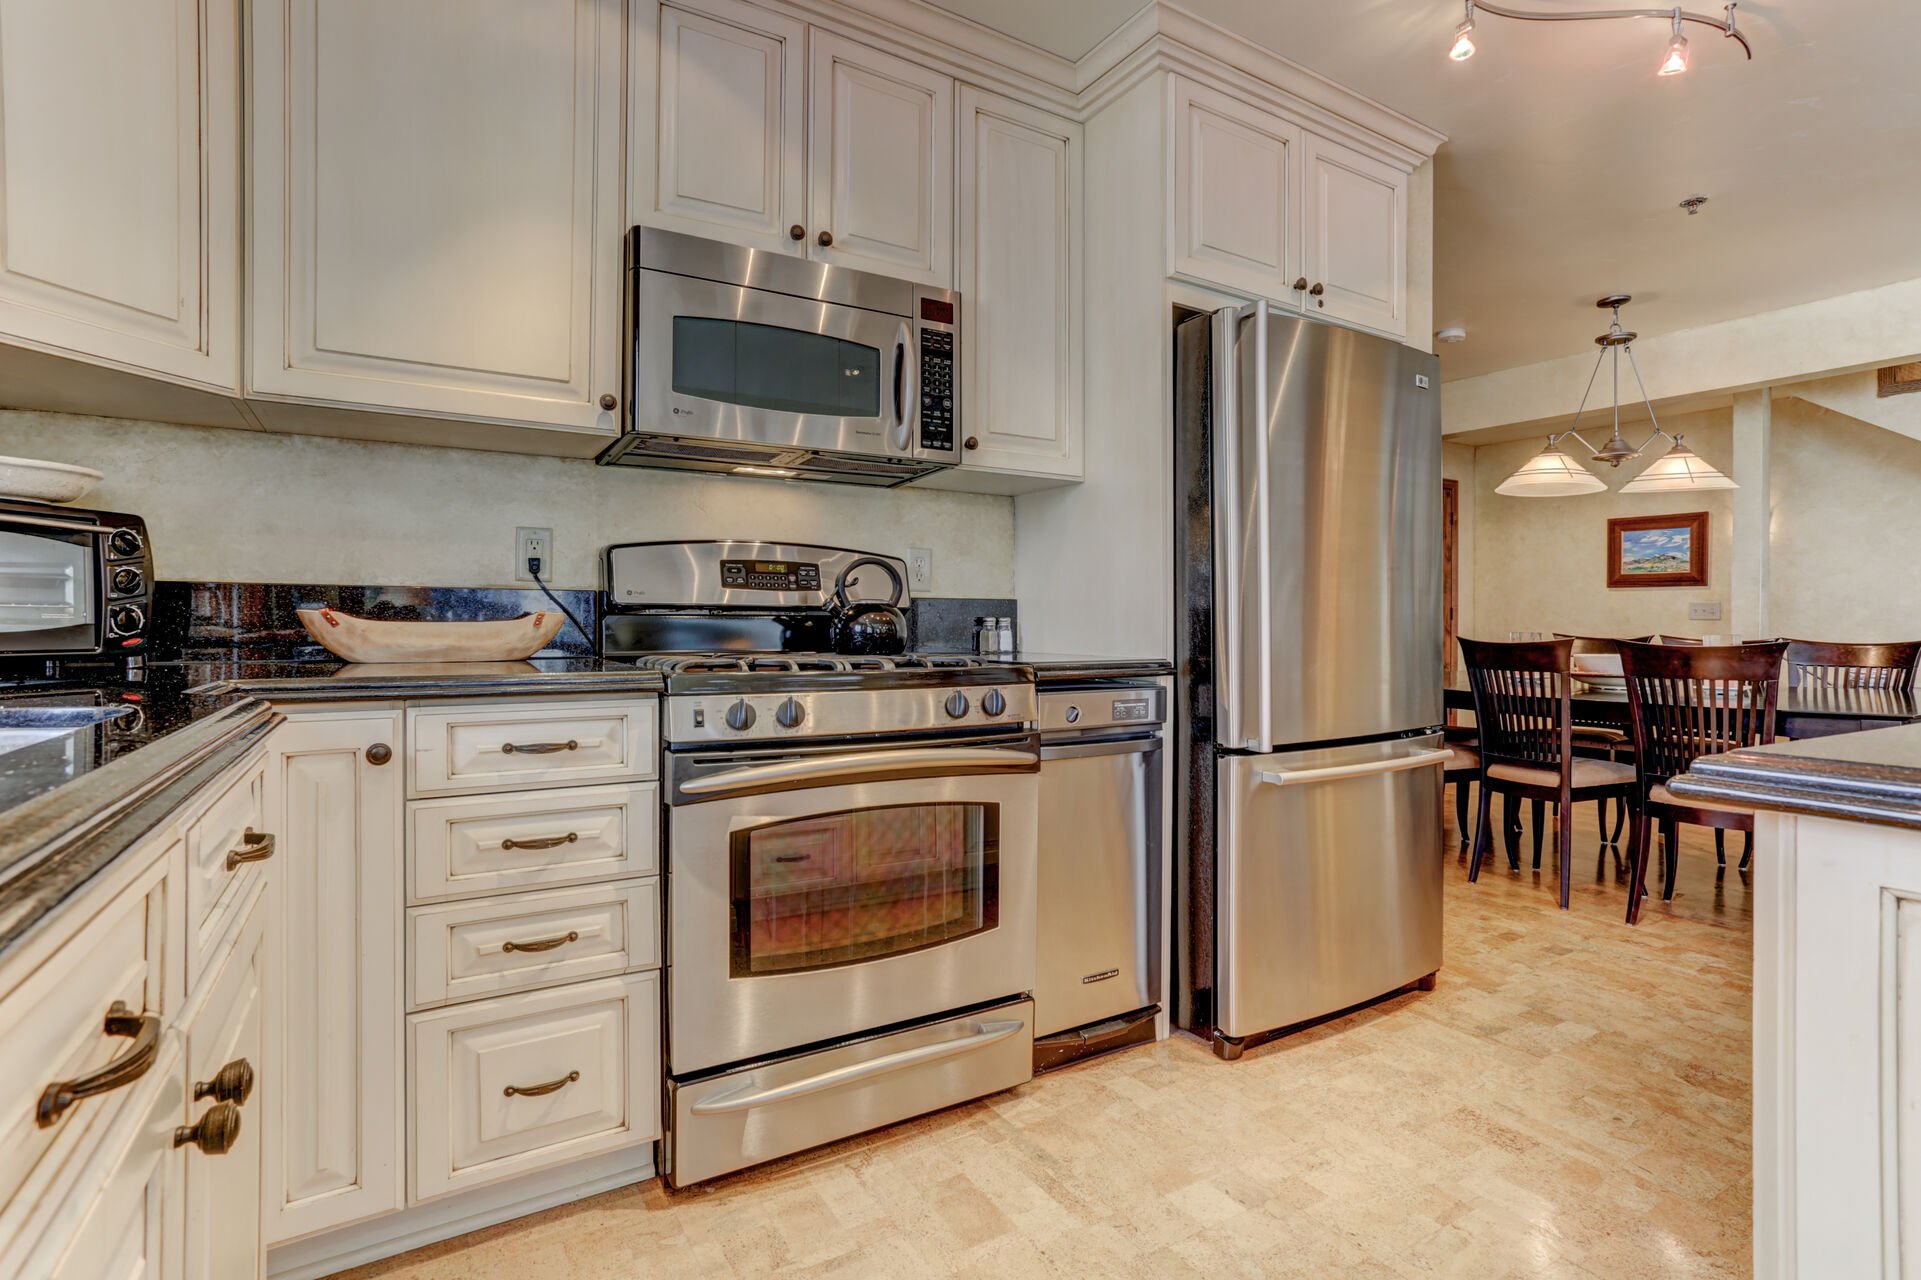 Gourmet Kitchen with Stainless Steel Appliances